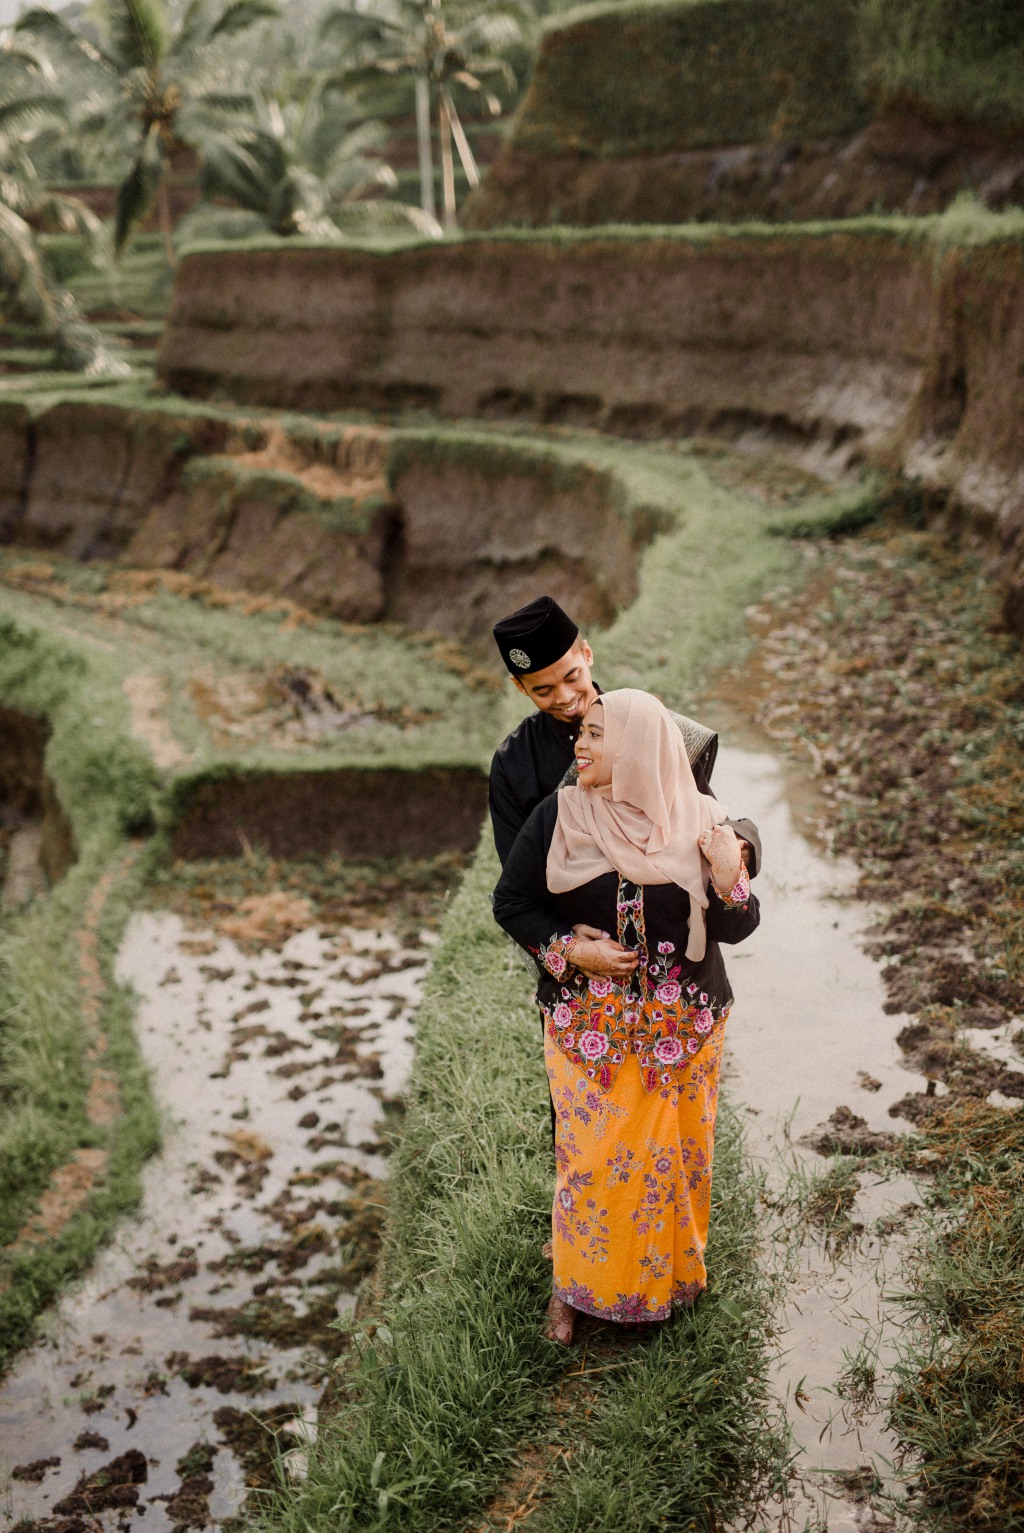 Bali Honeymoon Photography: Post-Wedding Photoshoot For Malay Couple At Tegallalang Rice Paddies  by Dex on OneThreeOneFour 24